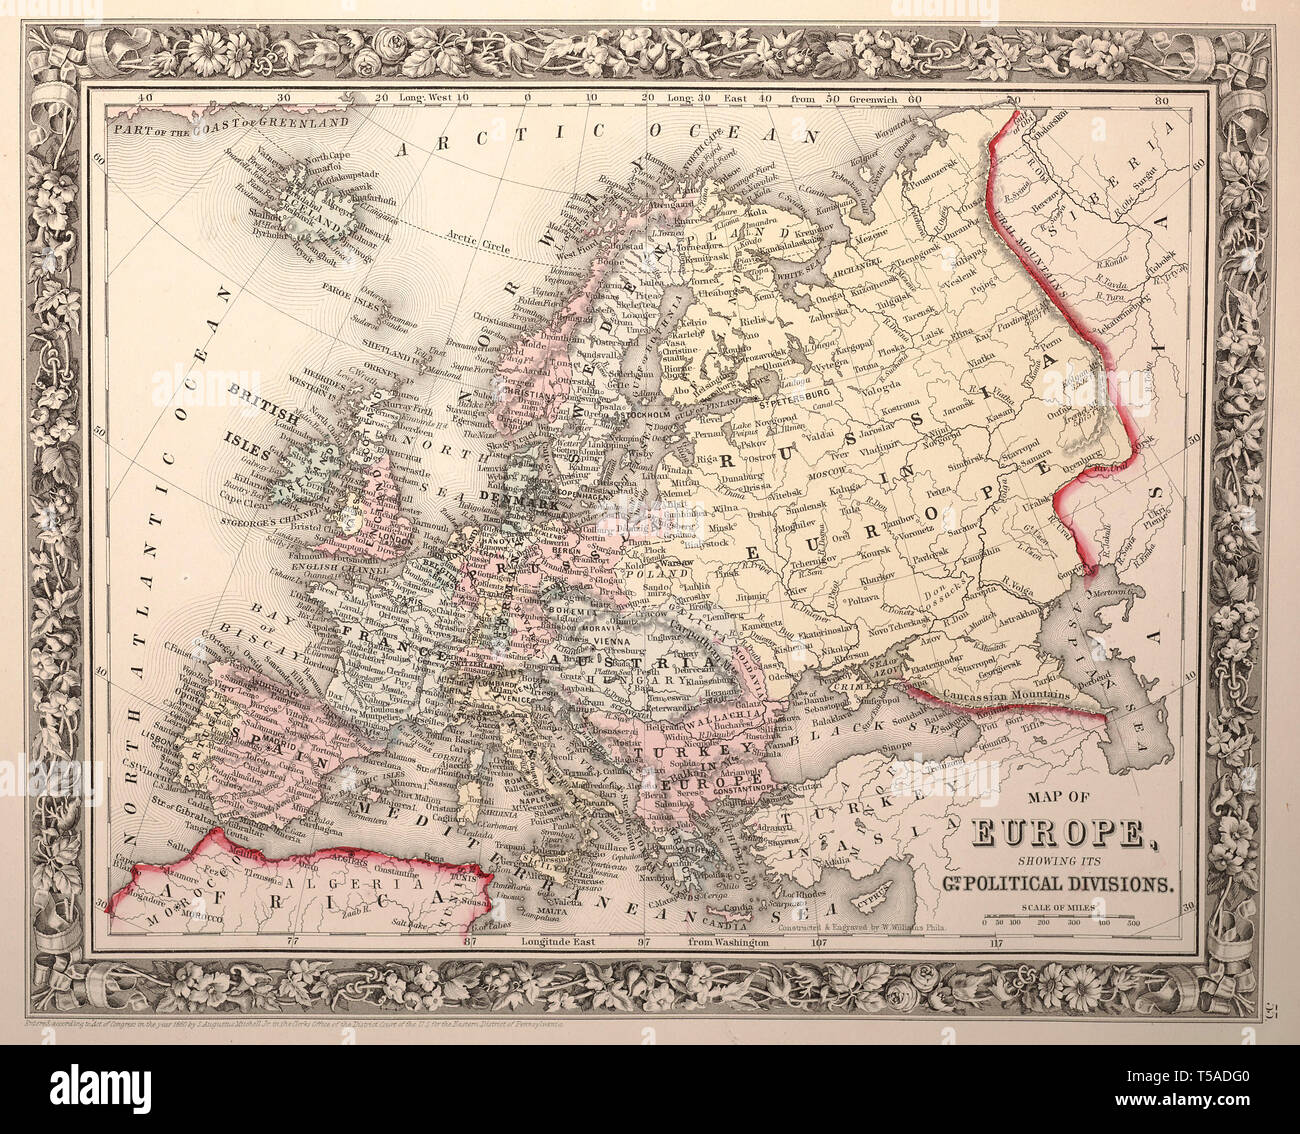 Beautiful vintage hand drawn map illustrations of Europe from old book. Can be used as poster or decorative element for interior design. Stock Photo